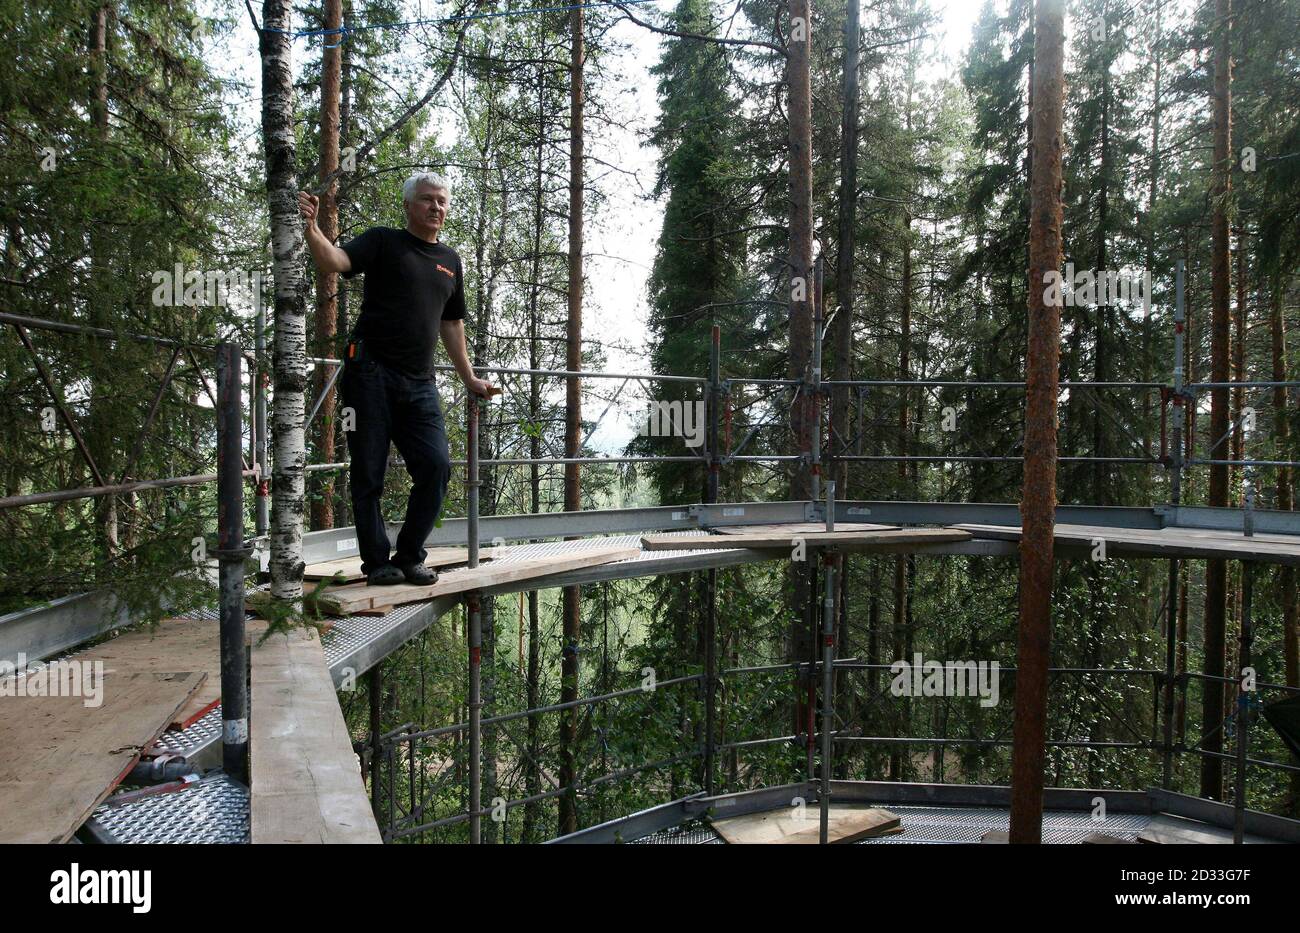 Treehotel co-founder Kent Lindvall stands on the scaffolding around The Nest on the construction site of Treehotel in the Swedish village of Harads, July 5, 2010. A lofty new hotel concept is set to open in a remote village in northern Sweden, which aims to elevate the simple treehouse into a world-class destination for design-conscious travellers. Treehotel, located in Harads about 60 km south of the Arctic Circle, will consist of four rooms when it opens on July 17th: The Cabin, The Blue Cone, The Nest and The Mirrorcube. Picture taken July 5, 2010.     To match Reuters Life! SWEDEN-TREEHOTE Stock Photo